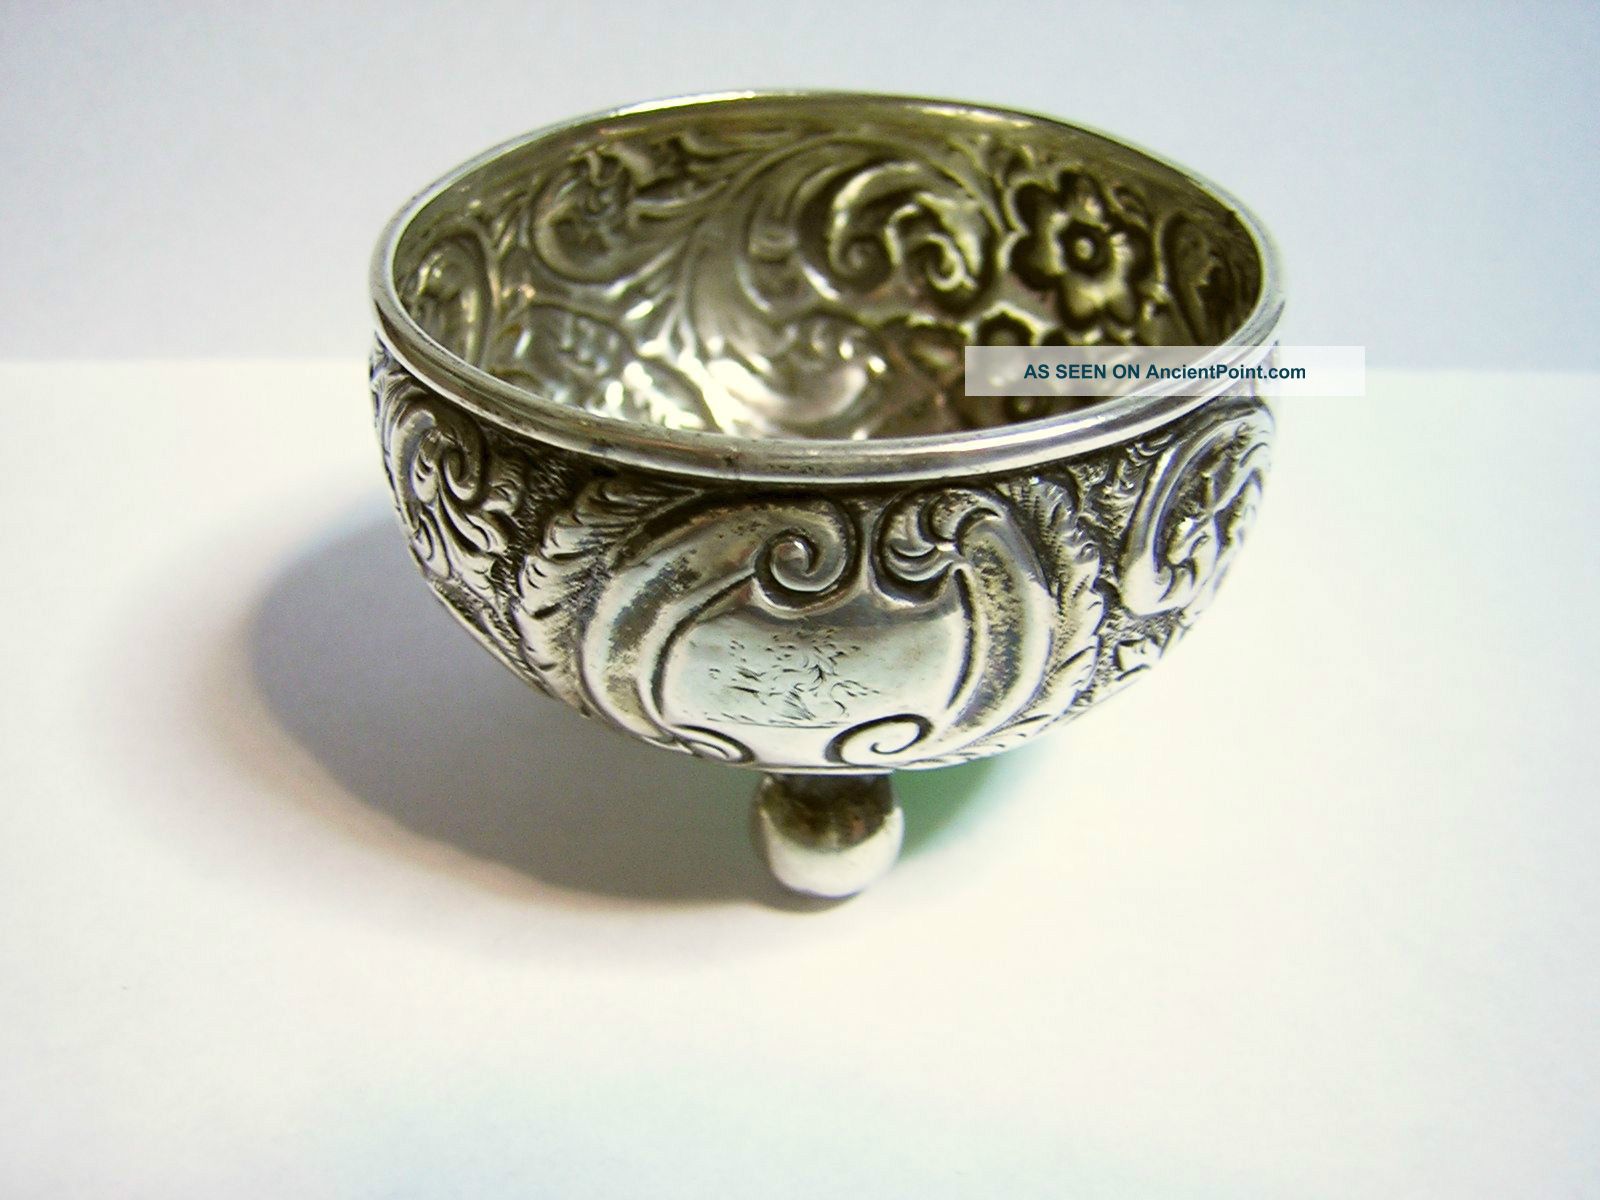 England / Birmingham 1890 - 91 Small Sterling Silver Bowl Repousse 2 - 1/4 